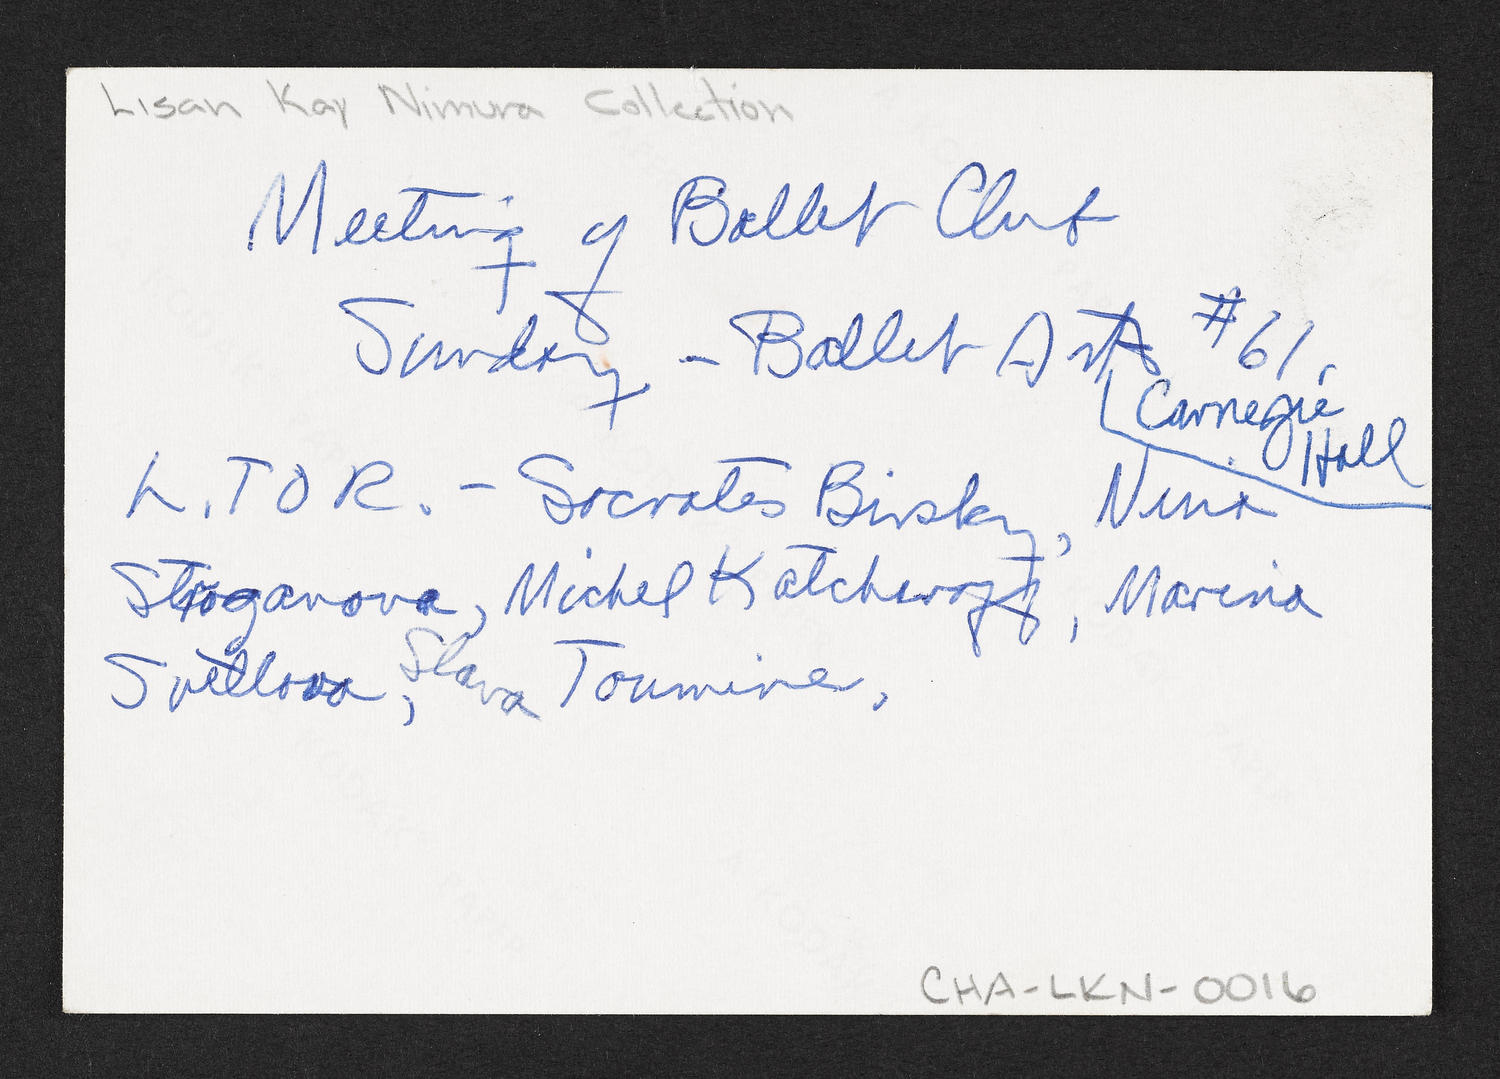 Meeting of the Ballet Club at Ballet Arts, Carnegie Hall Studio #61 (back)